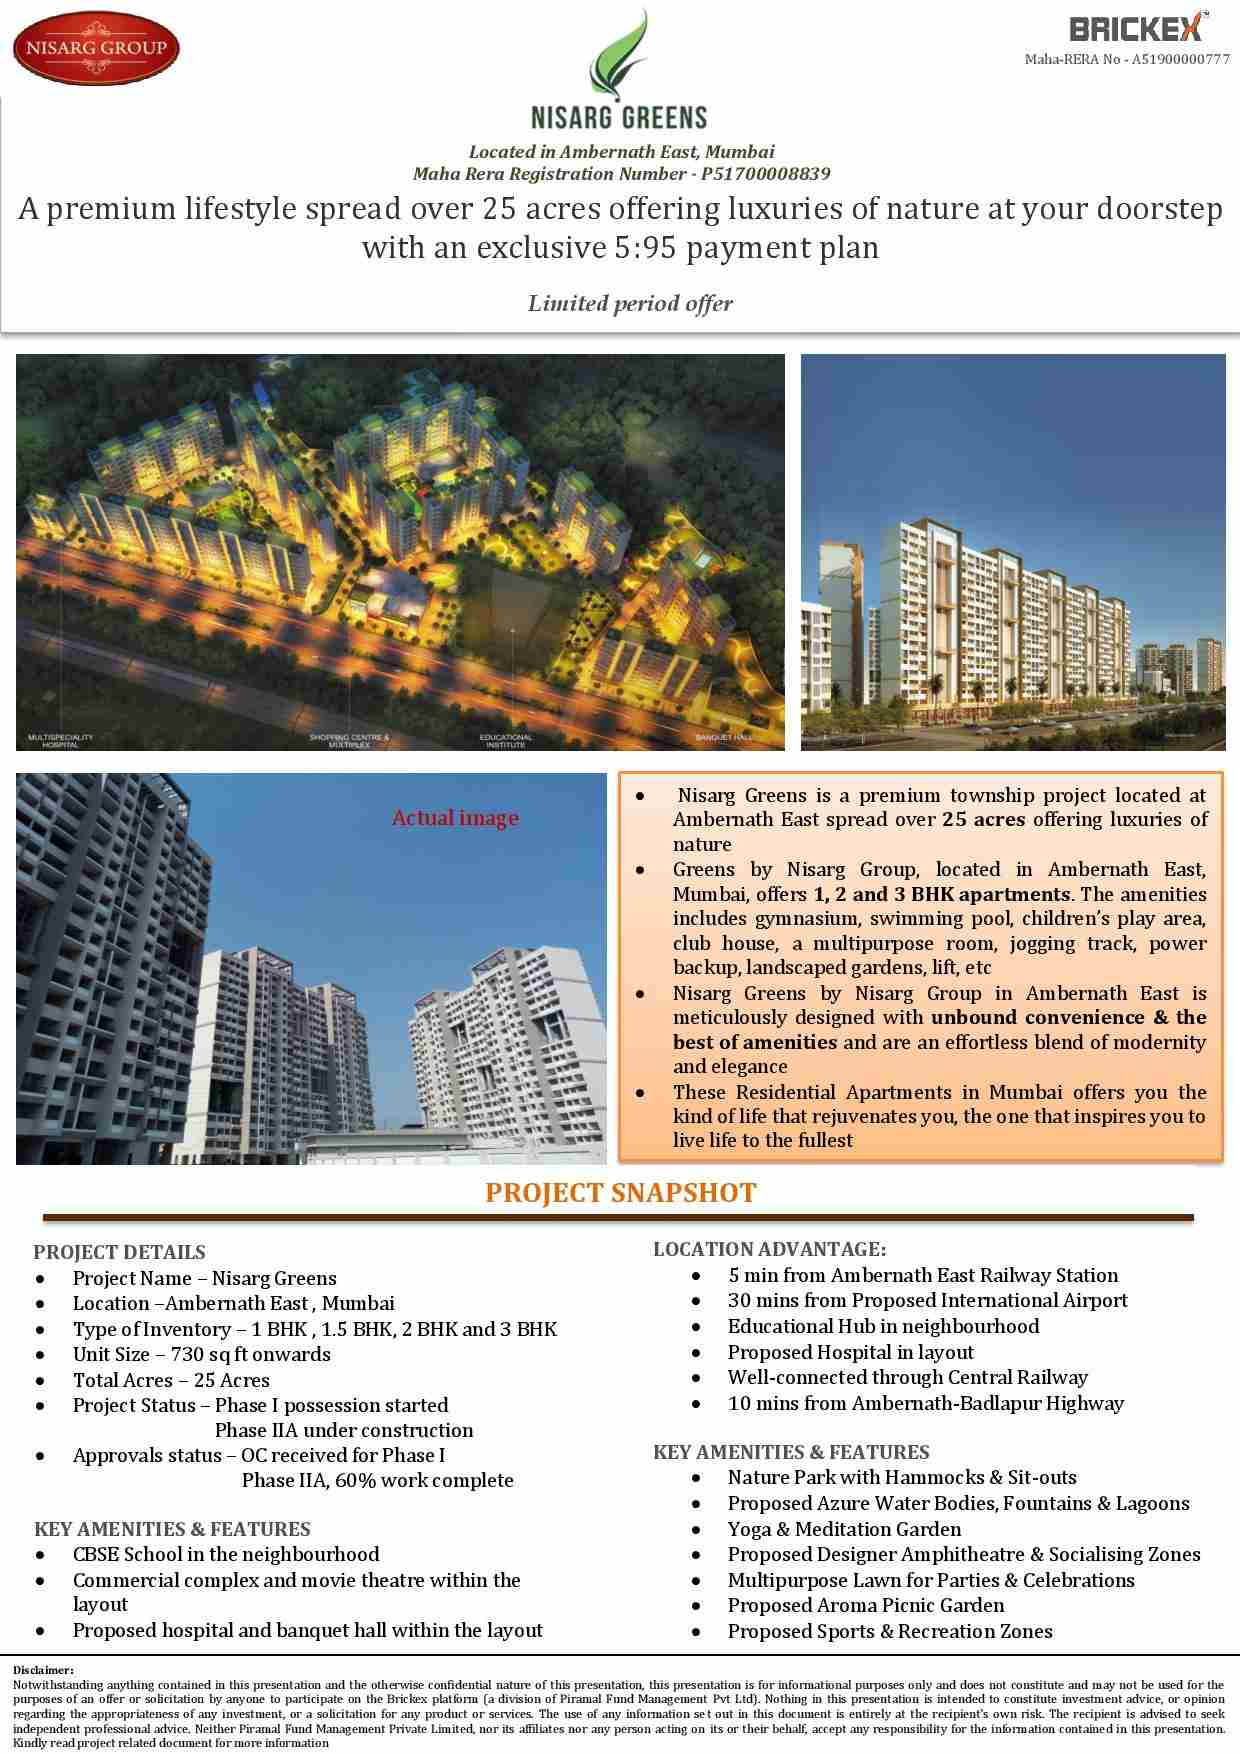 Avail an exclusive 5:95 payment plan at Nisarg Greens in Mumbai Update